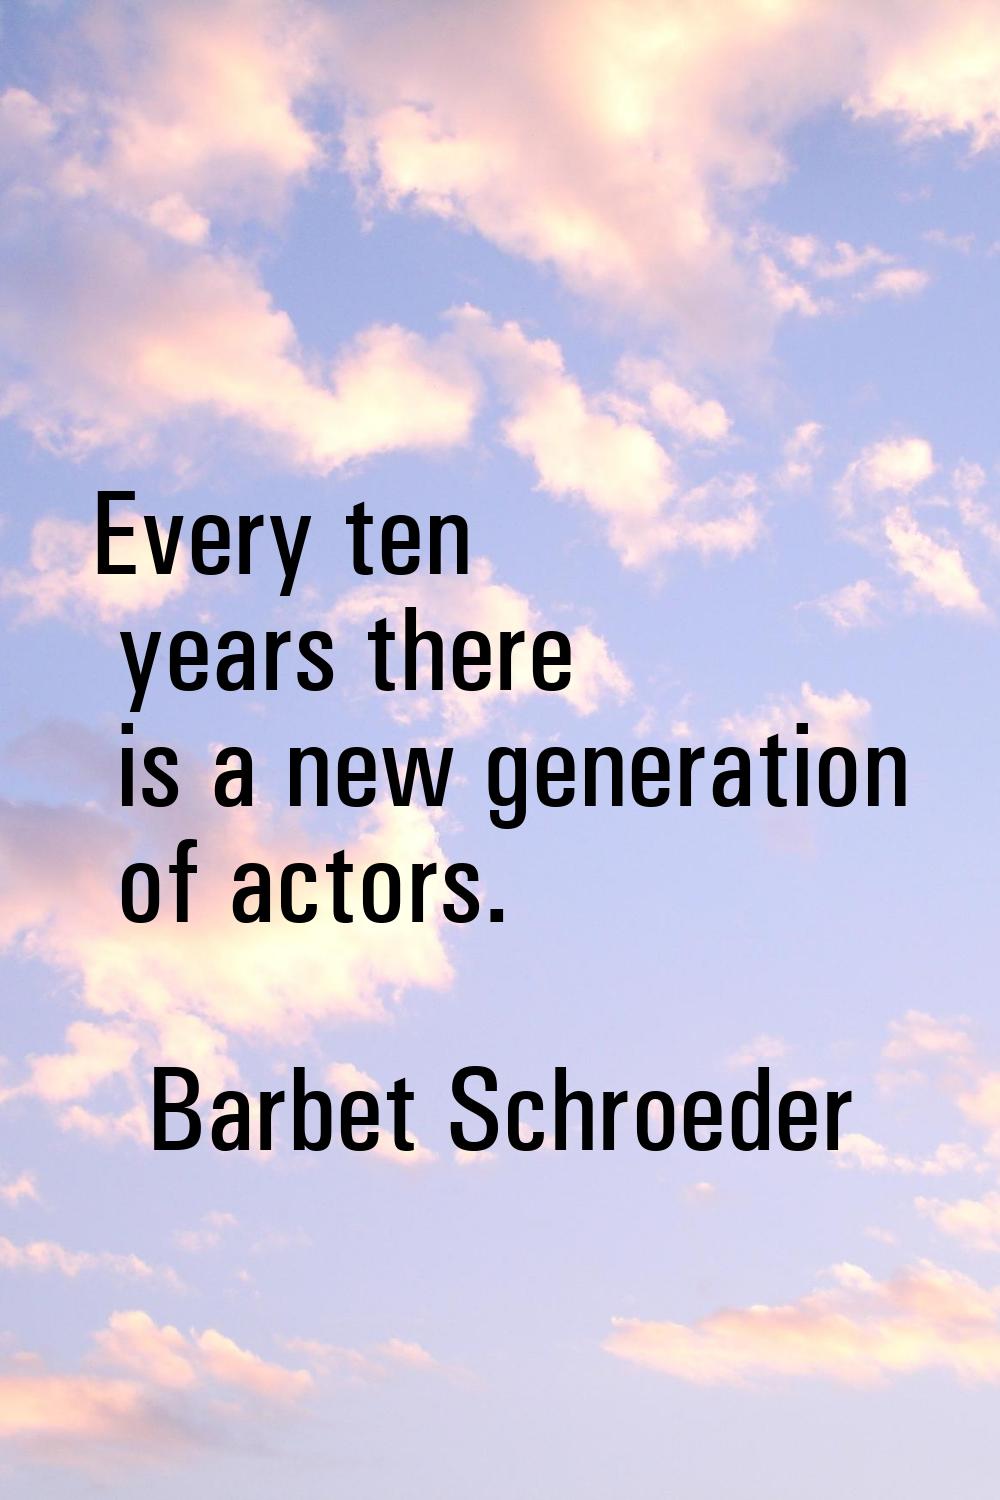 Every ten years there is a new generation of actors.